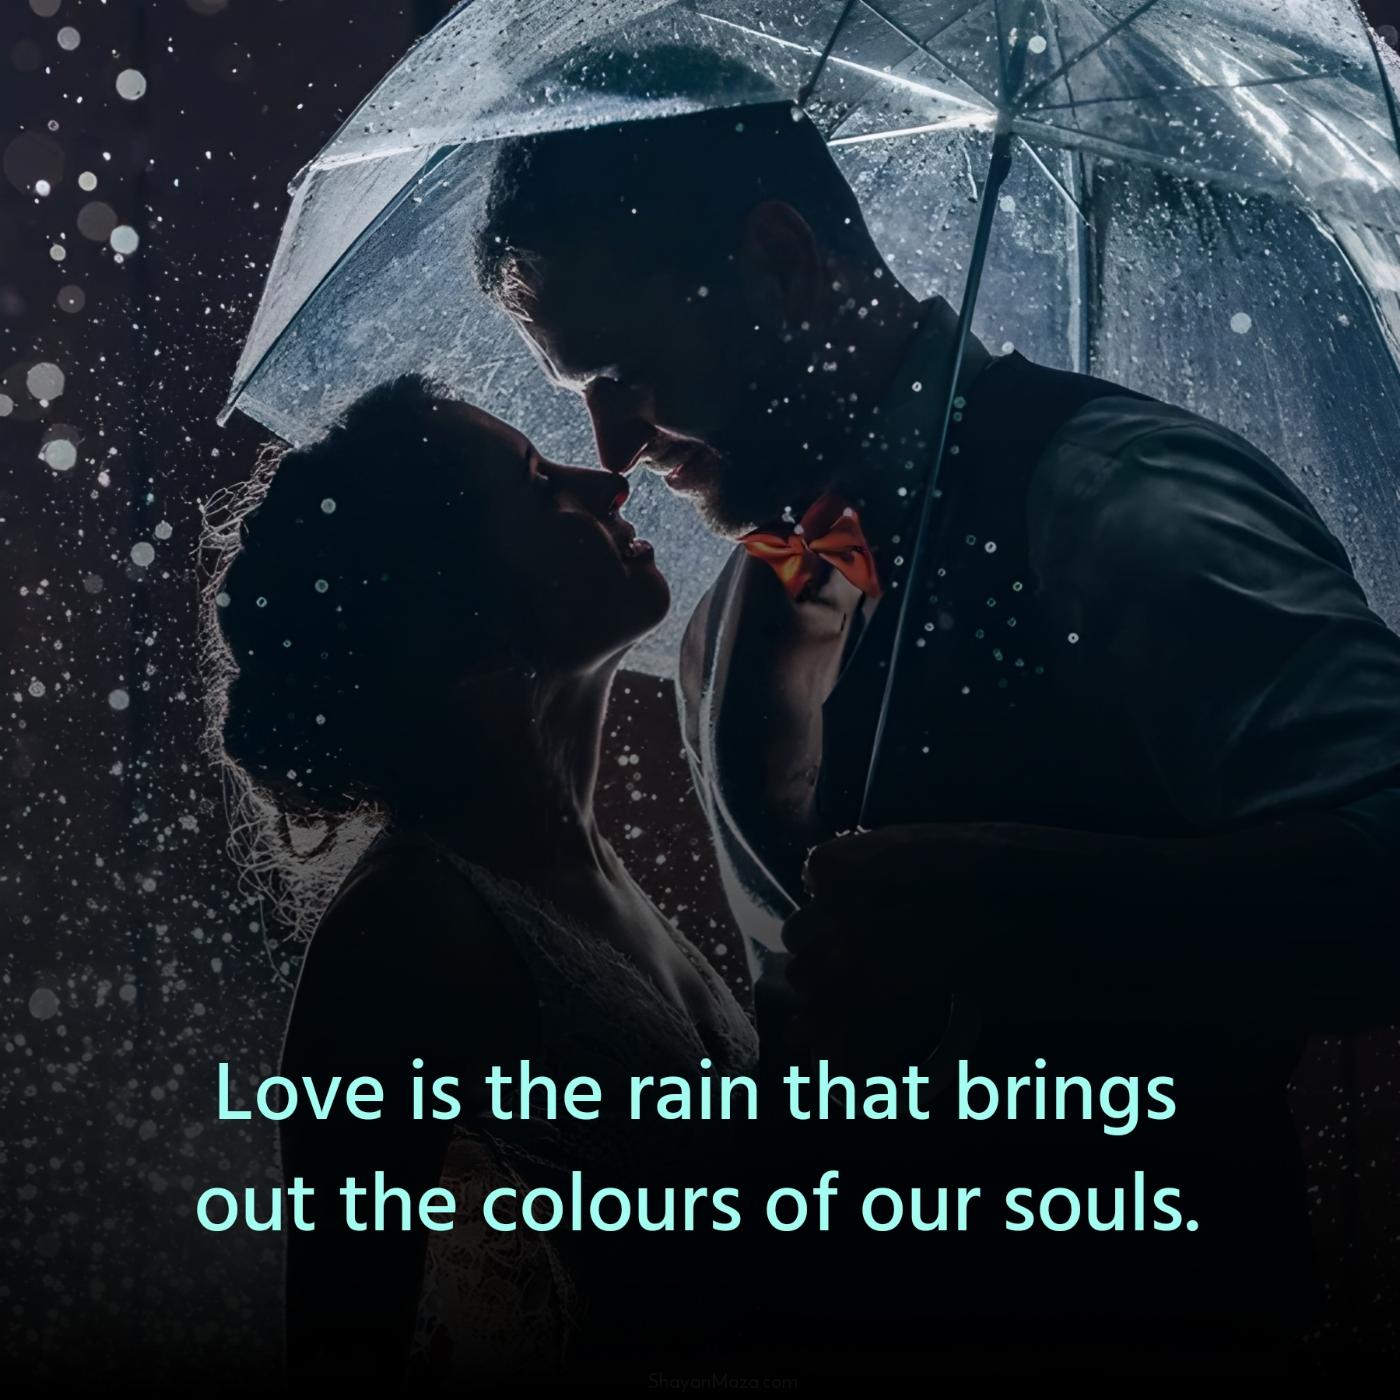 Love is the rain that brings out the colours of our souls